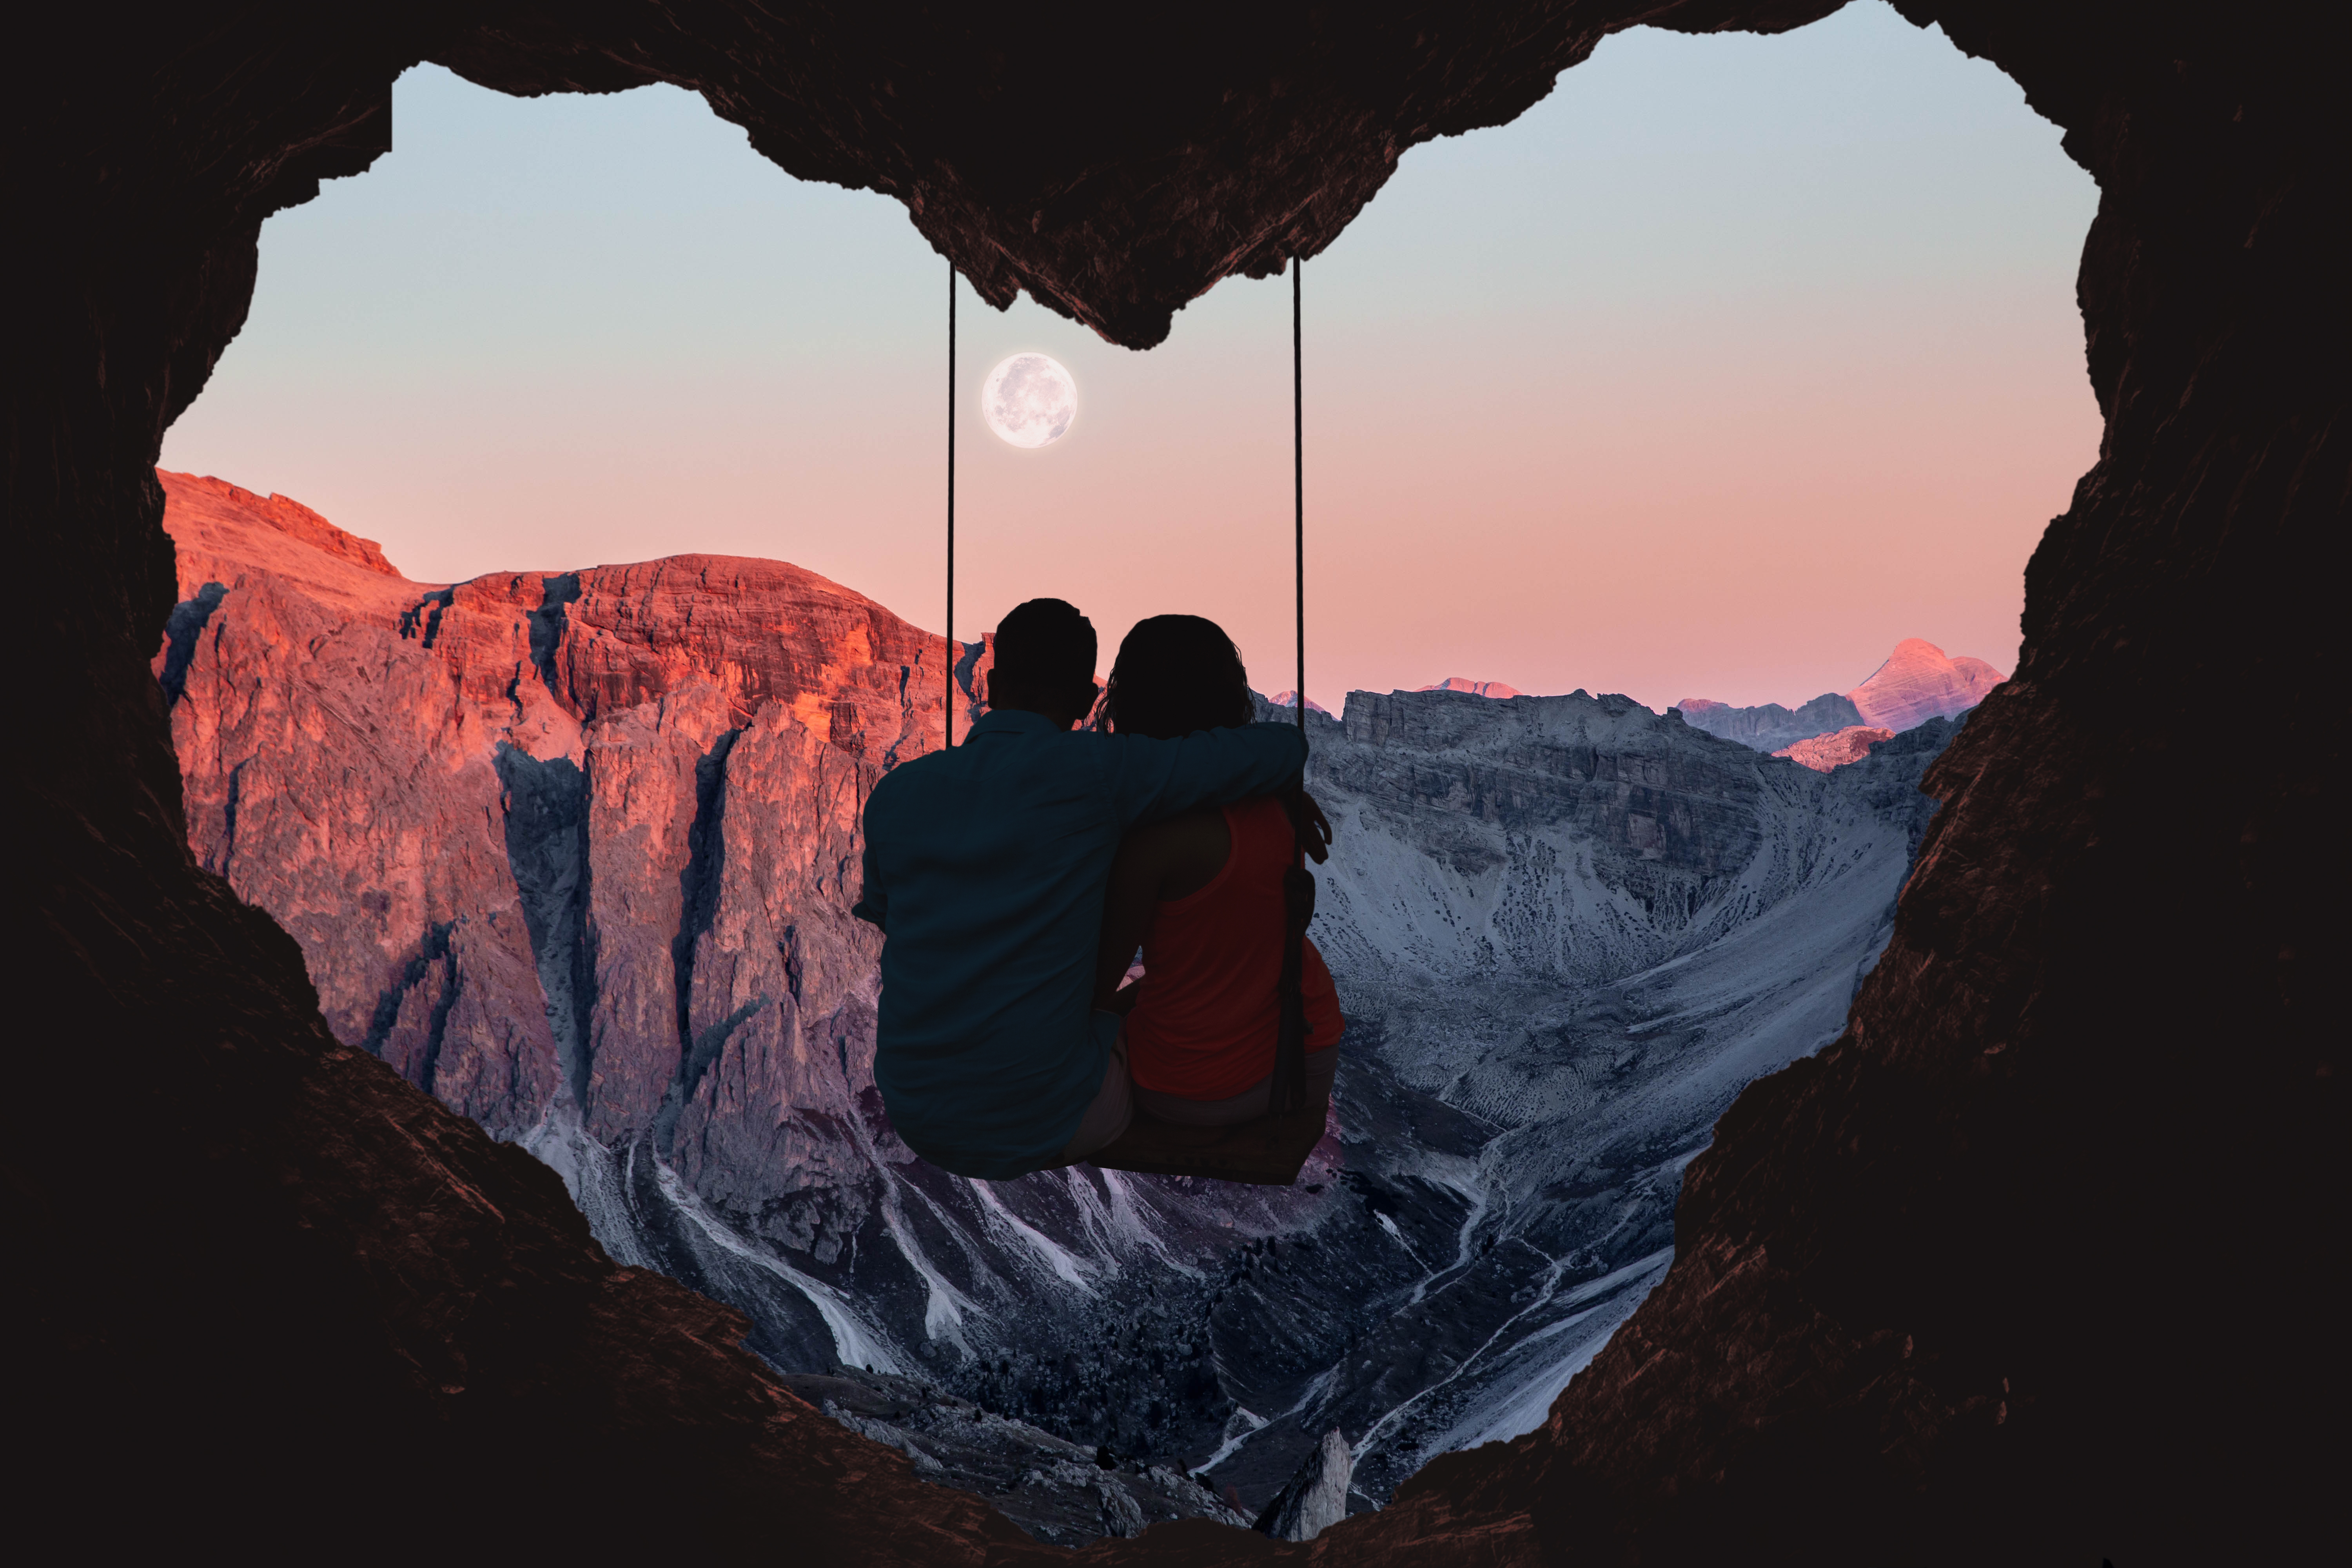 A couple sitting on a swing in heart-shaped cave, looking out at the Alps Mountains during sunset. | Source: Getty Images